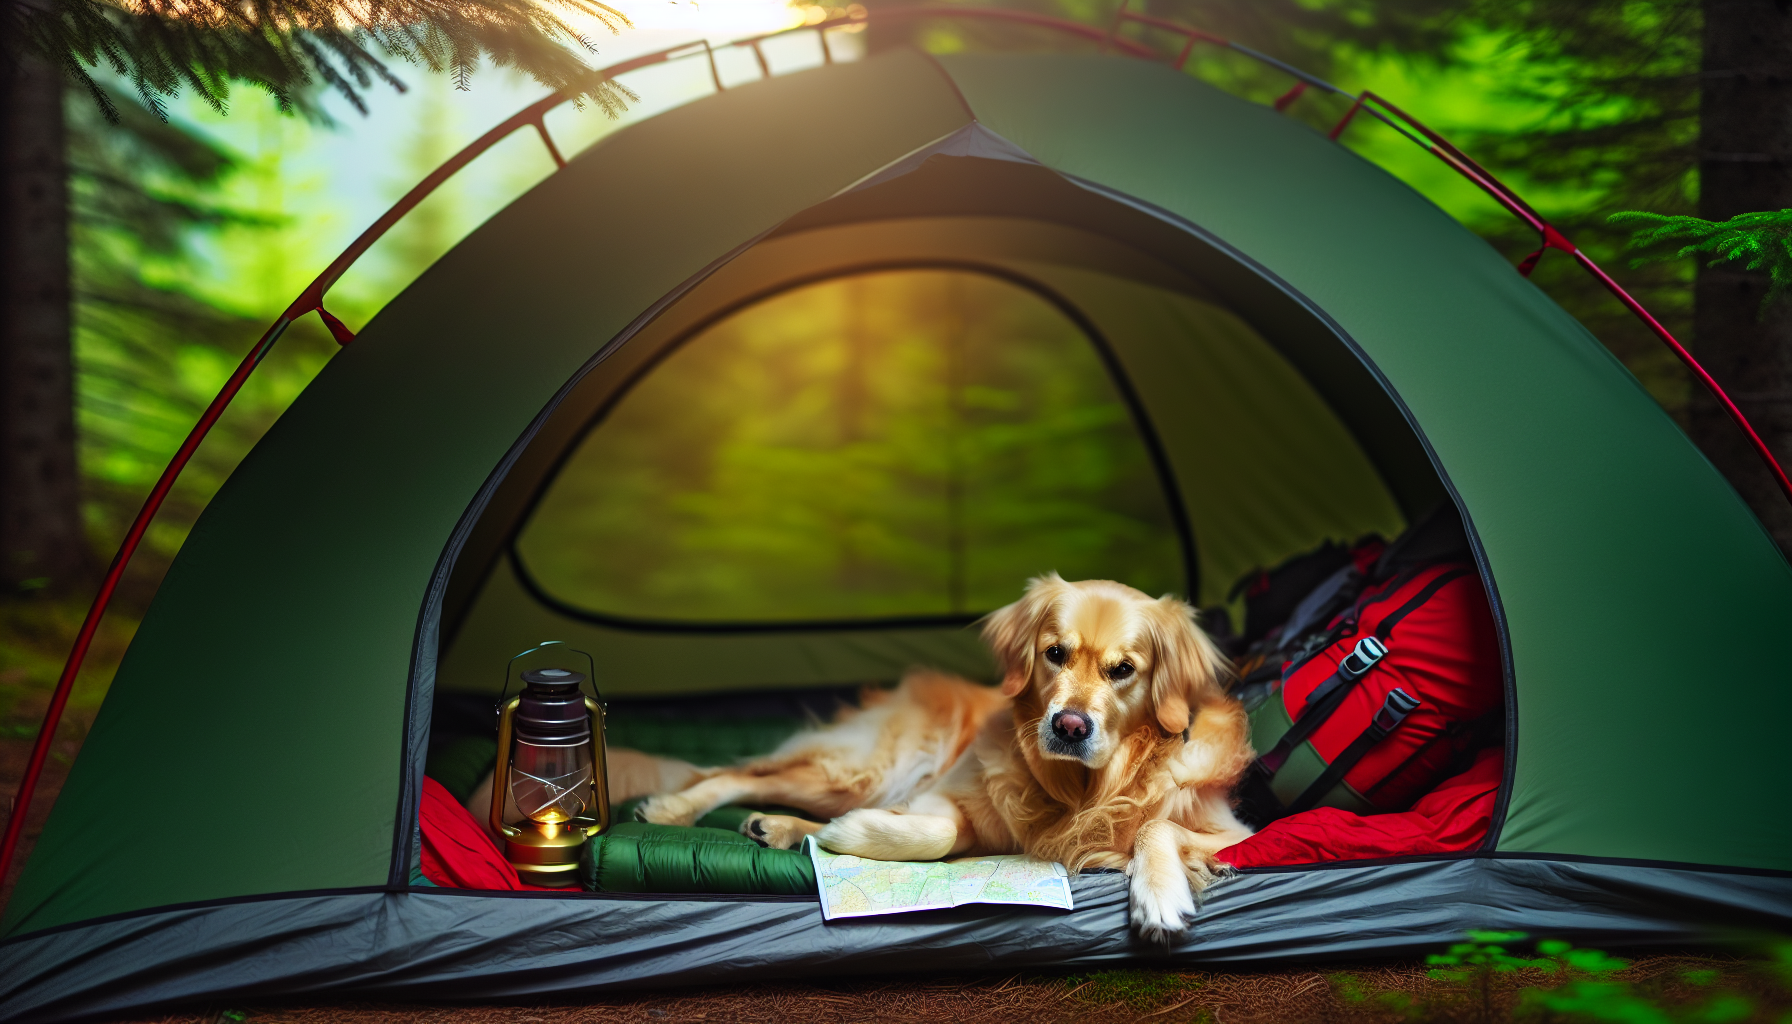 A dog resting comfortably inside a camping tent